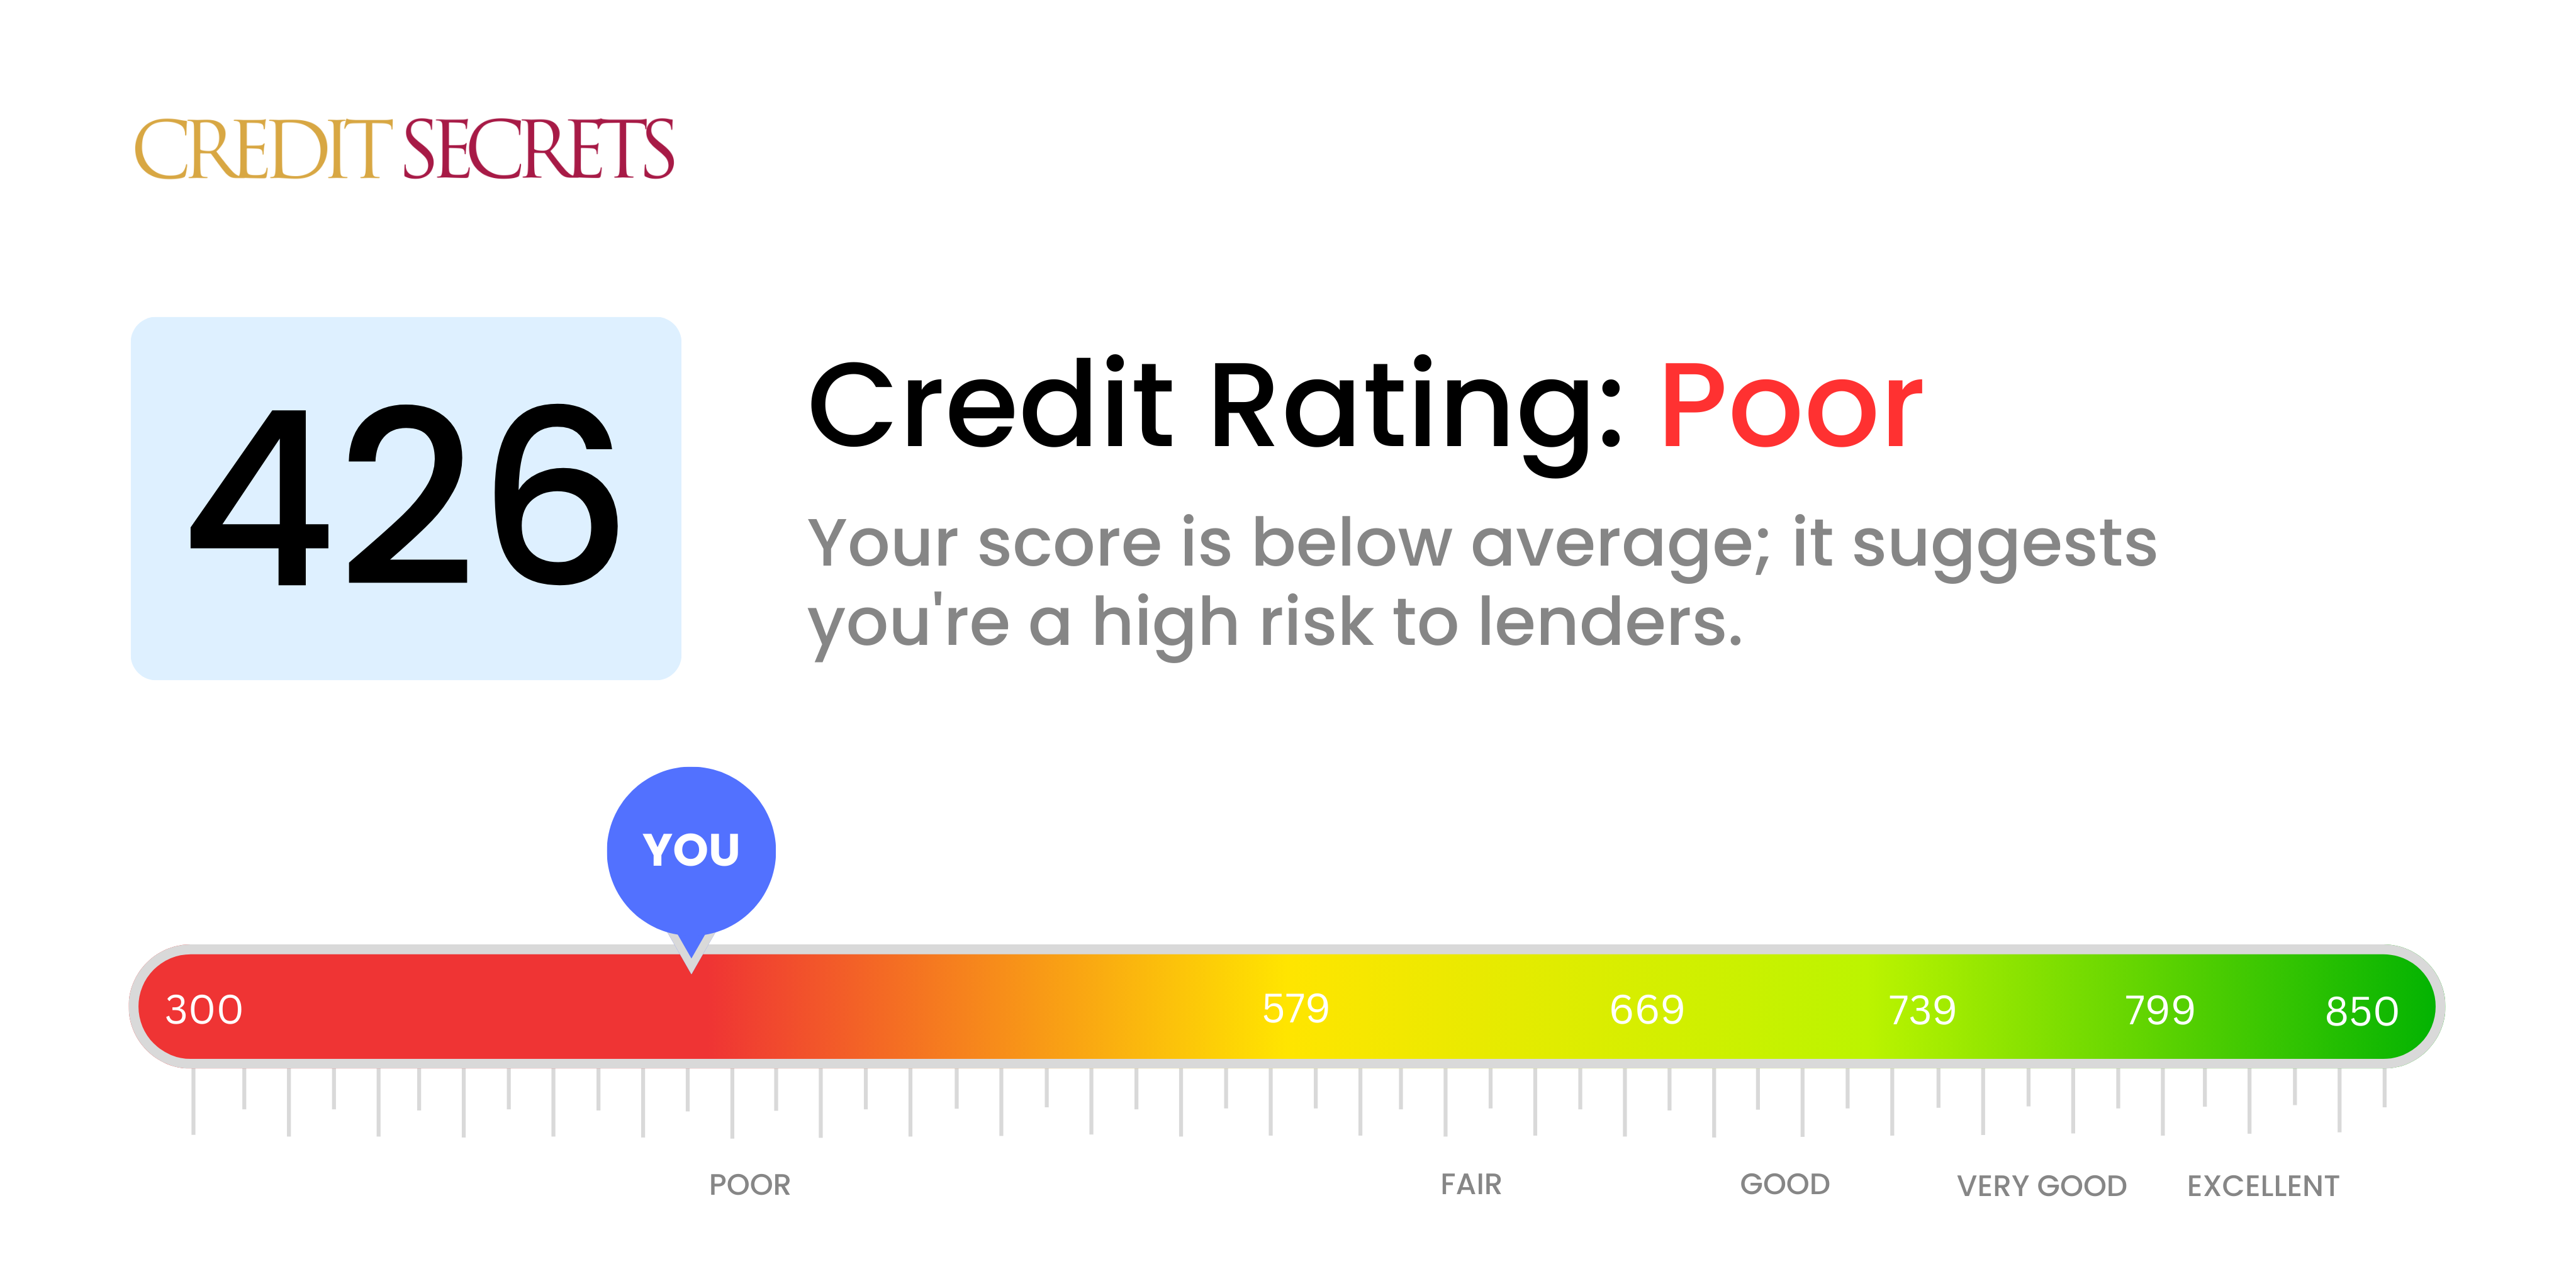 Is 426 a good credit score?